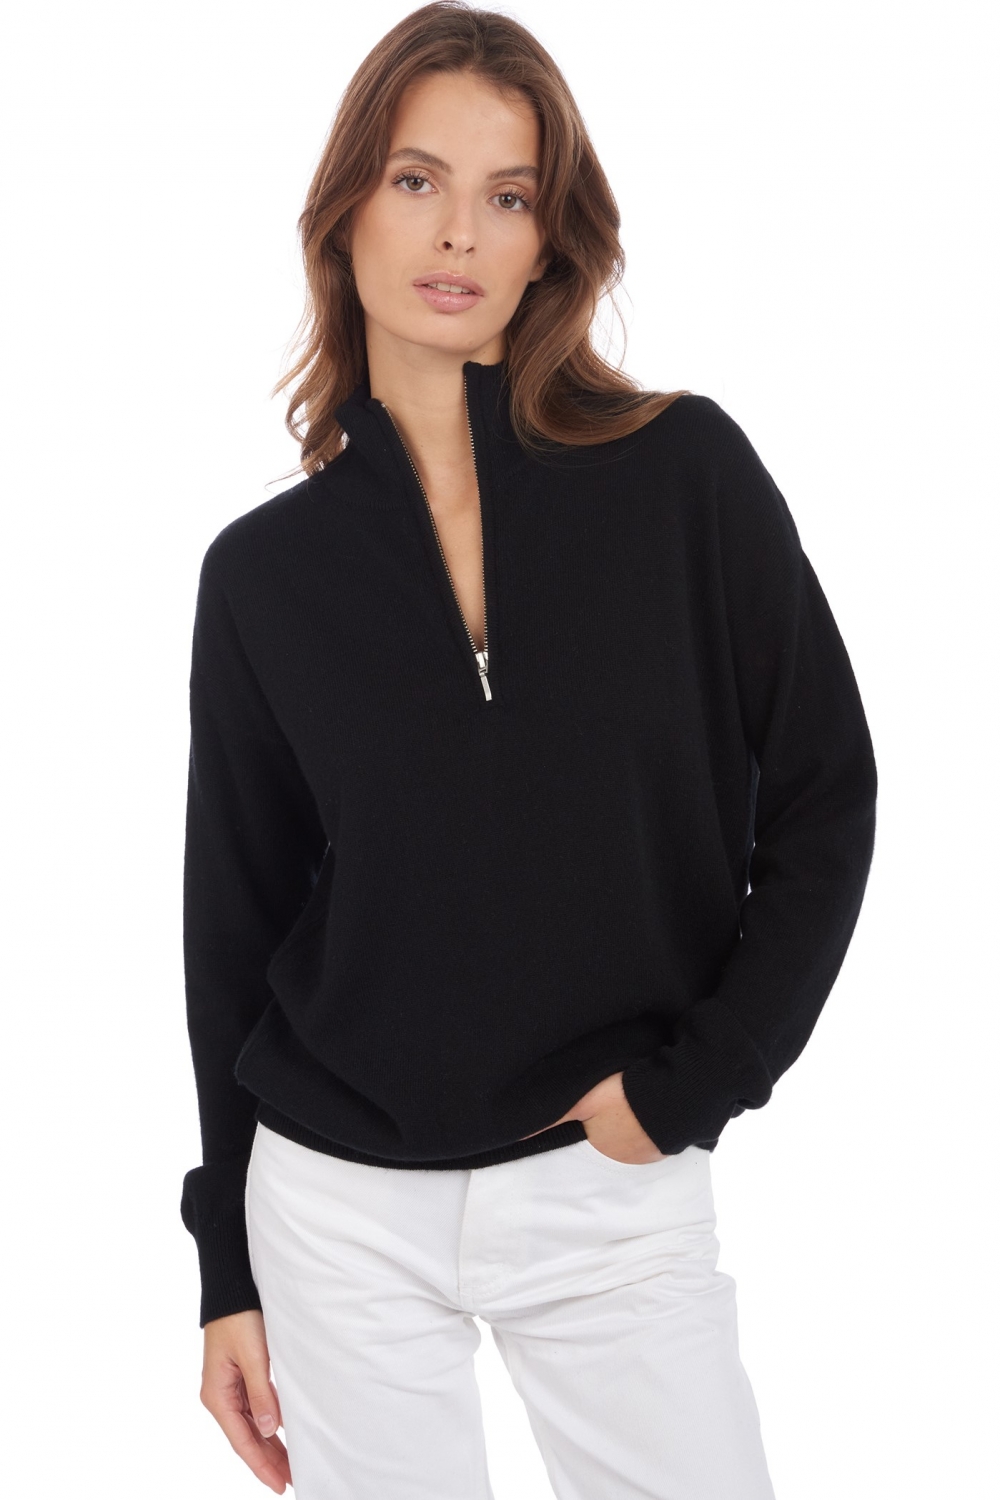 Cashmere ladies our full range of women s sweaters groseille black xs